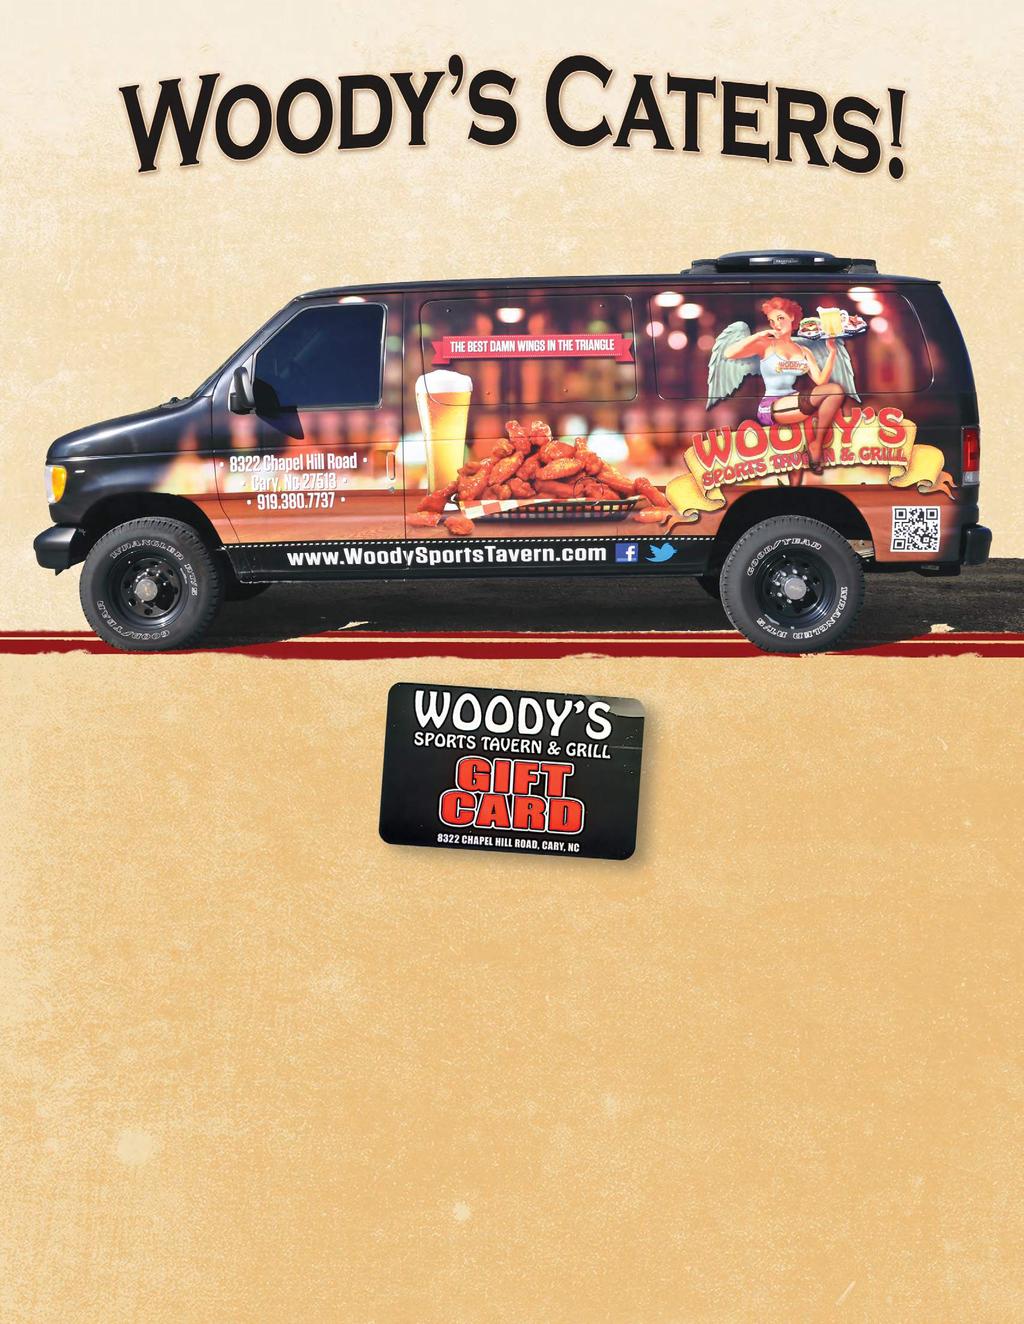 CALL FOR DETAILS AND PRICING. 919.380.7737 ORDER WOODY S TO GO!